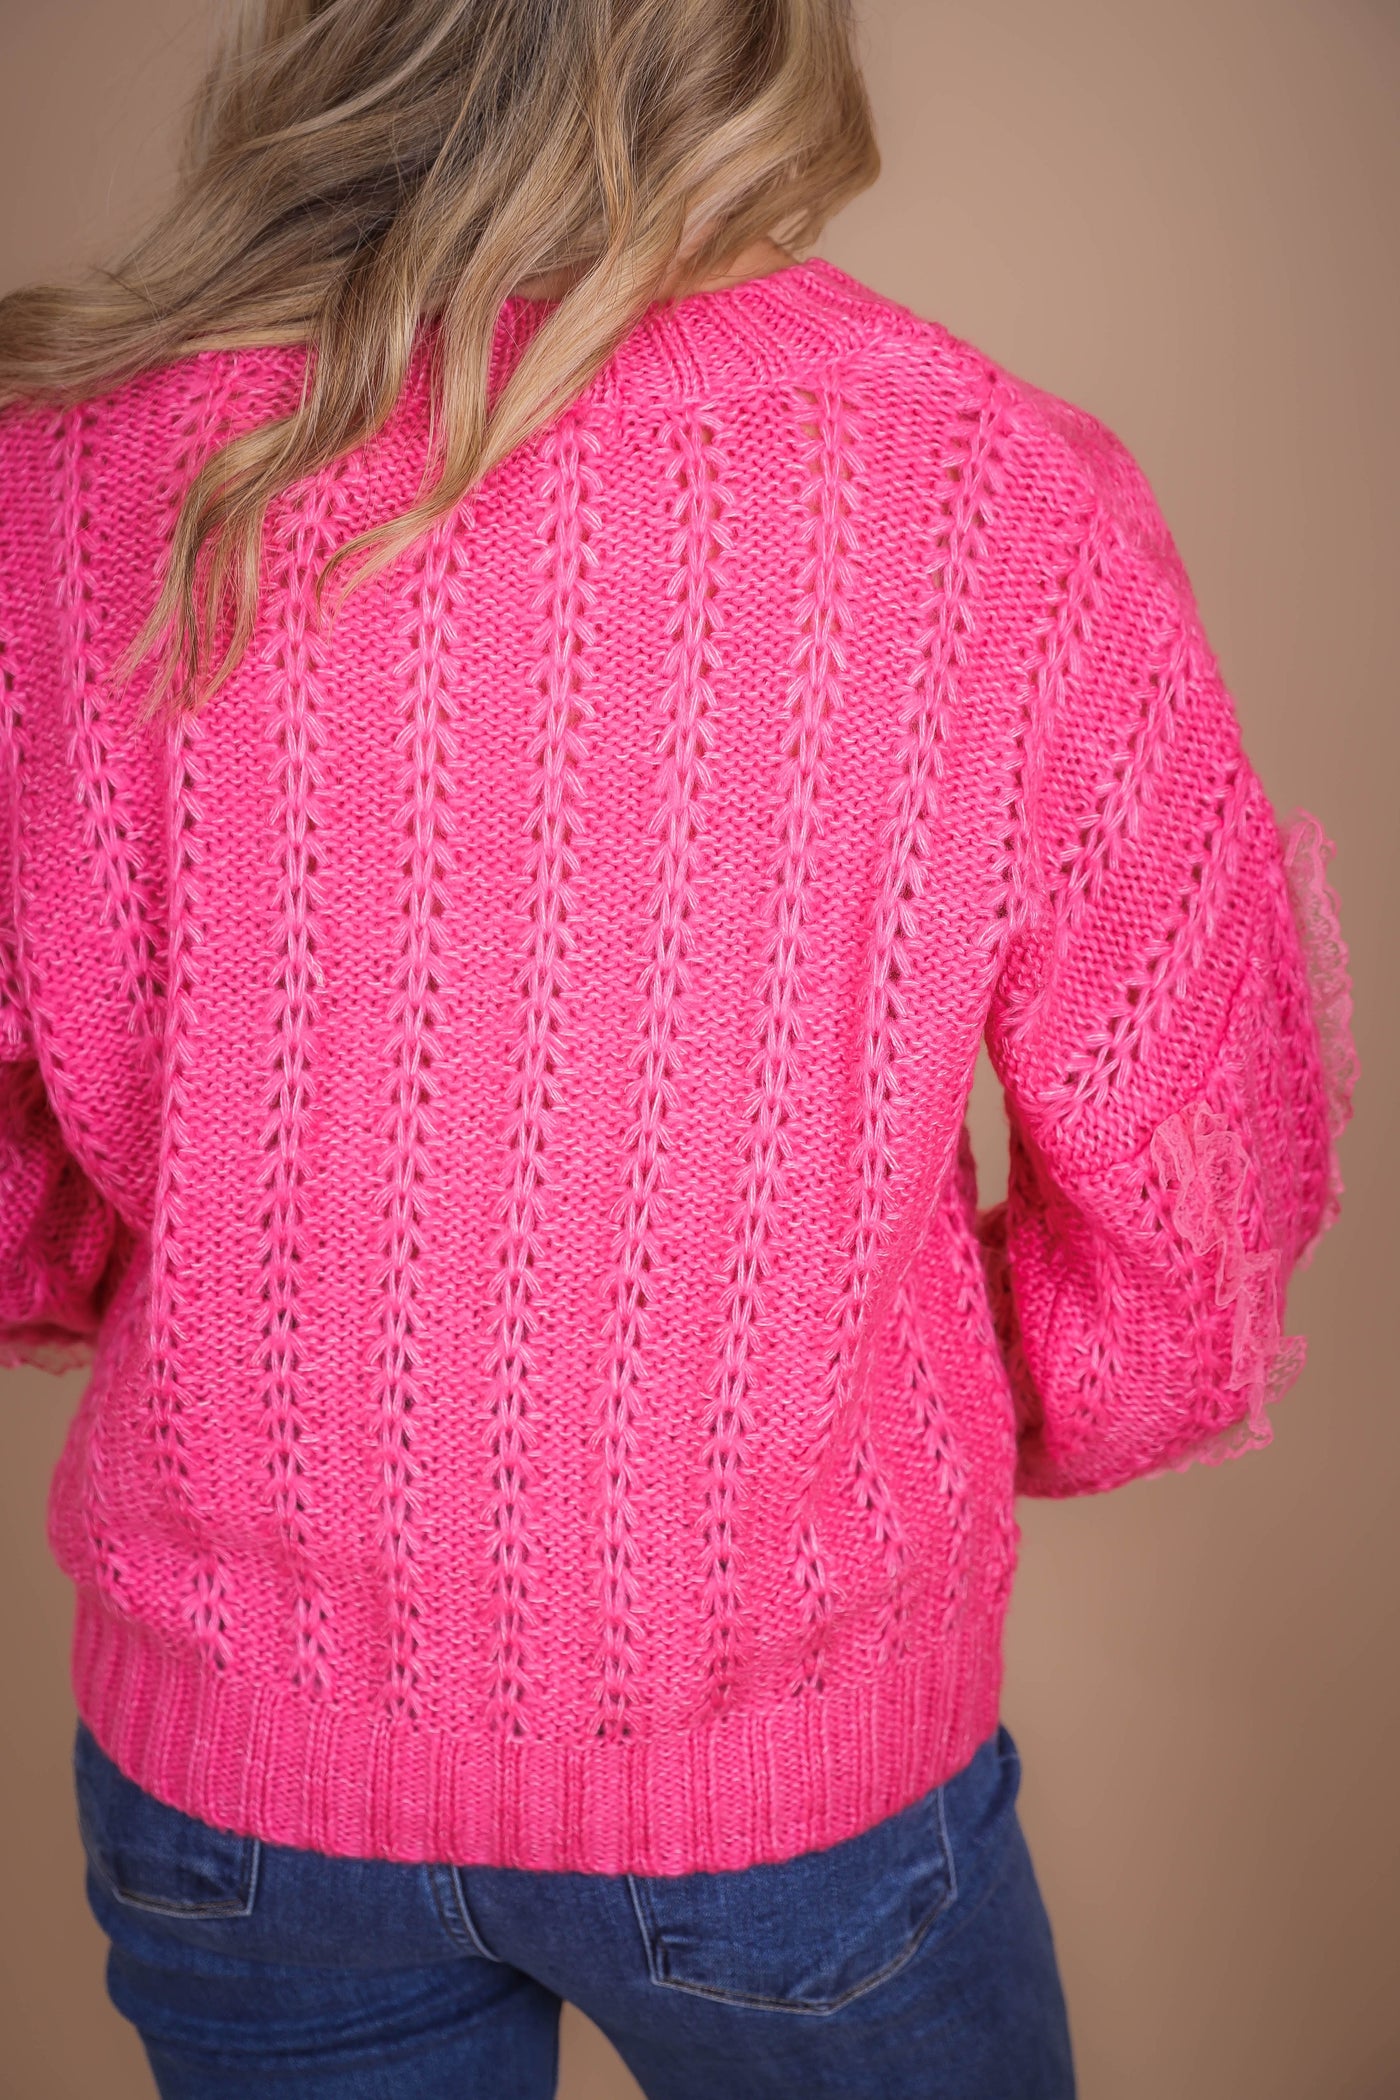 Hot Pink Knit and Lace Sweater- Love Fancy Sweater- Ballet Core Sweater